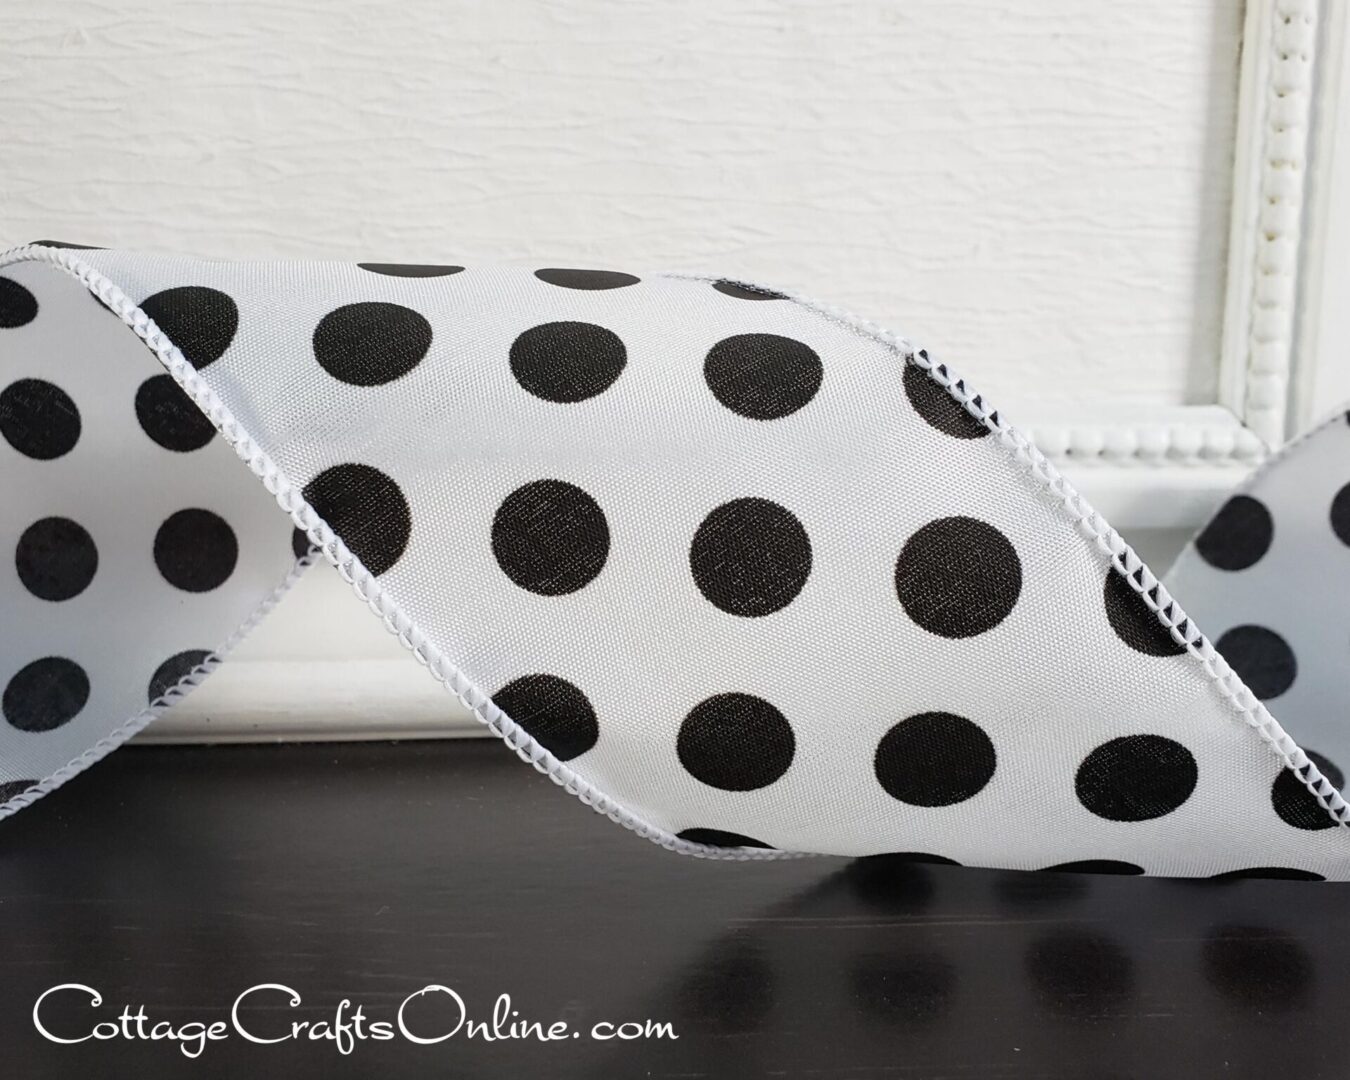 Large black dots on white satin 2.5" wide wired ribbon from the Etsy shop of Cottage Crafts Online.